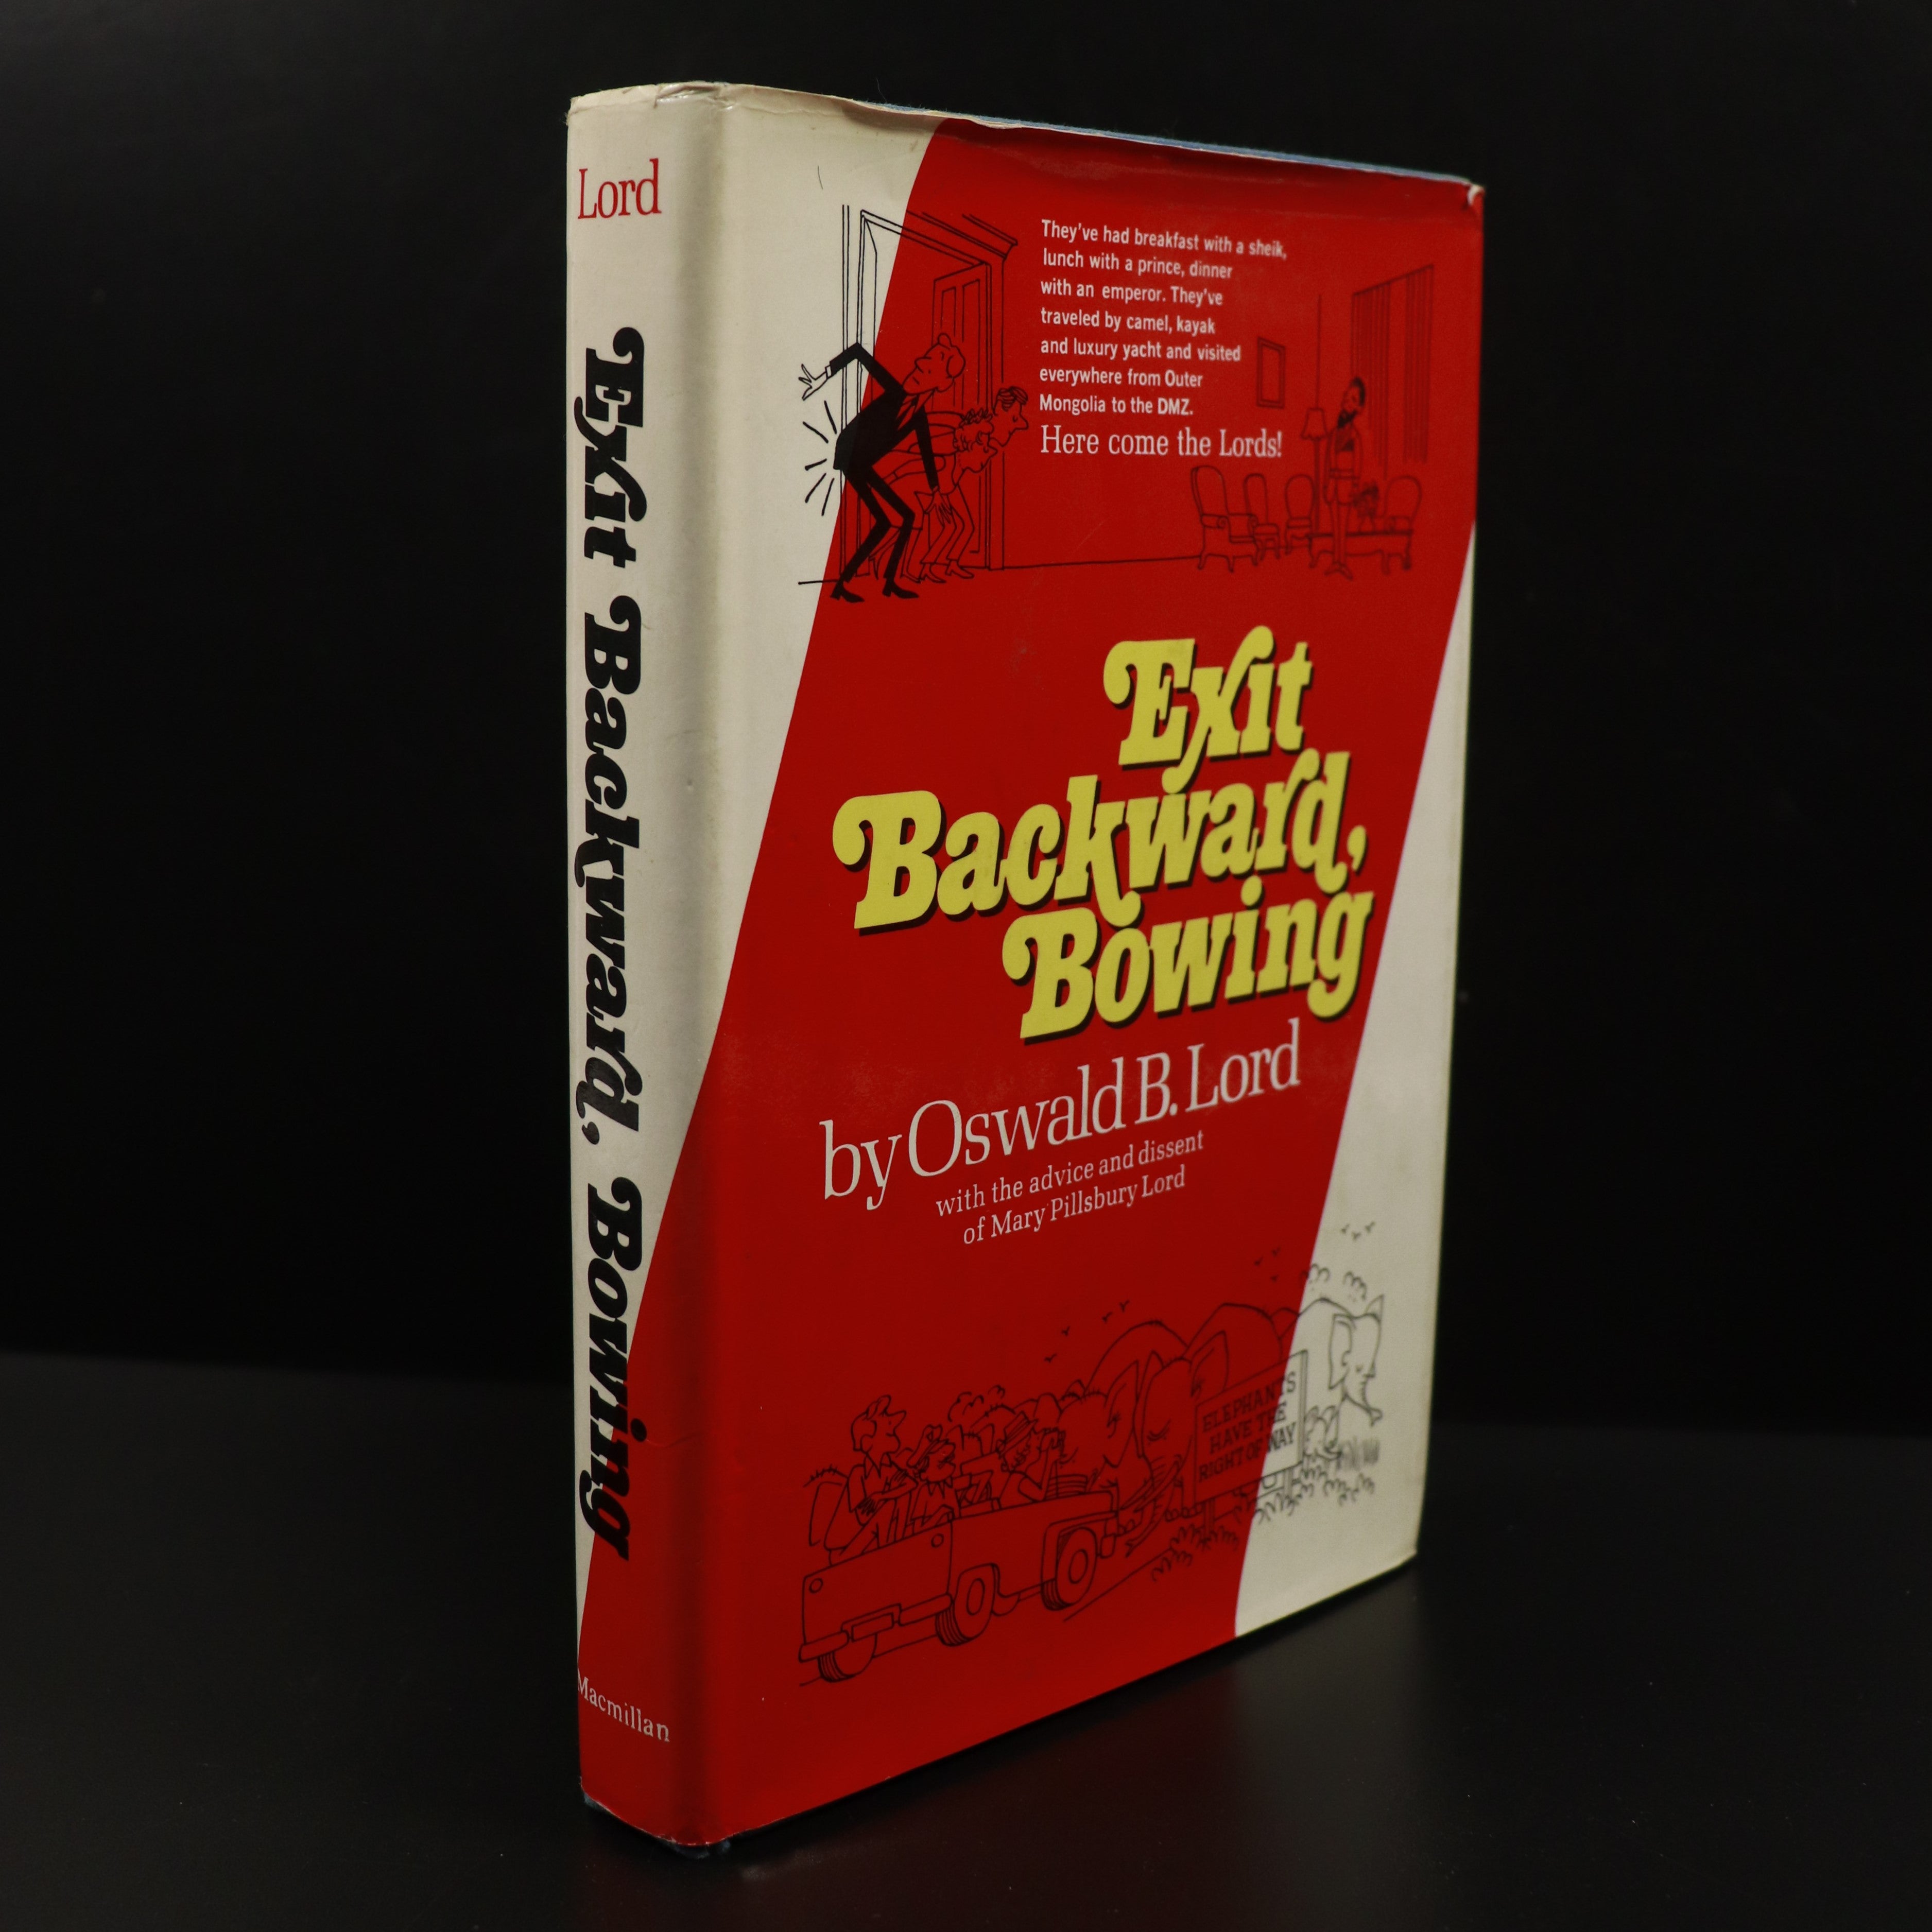 1970 Exit Backward Bowing by Oswald B. Lord Vintage Travel Exploration Book